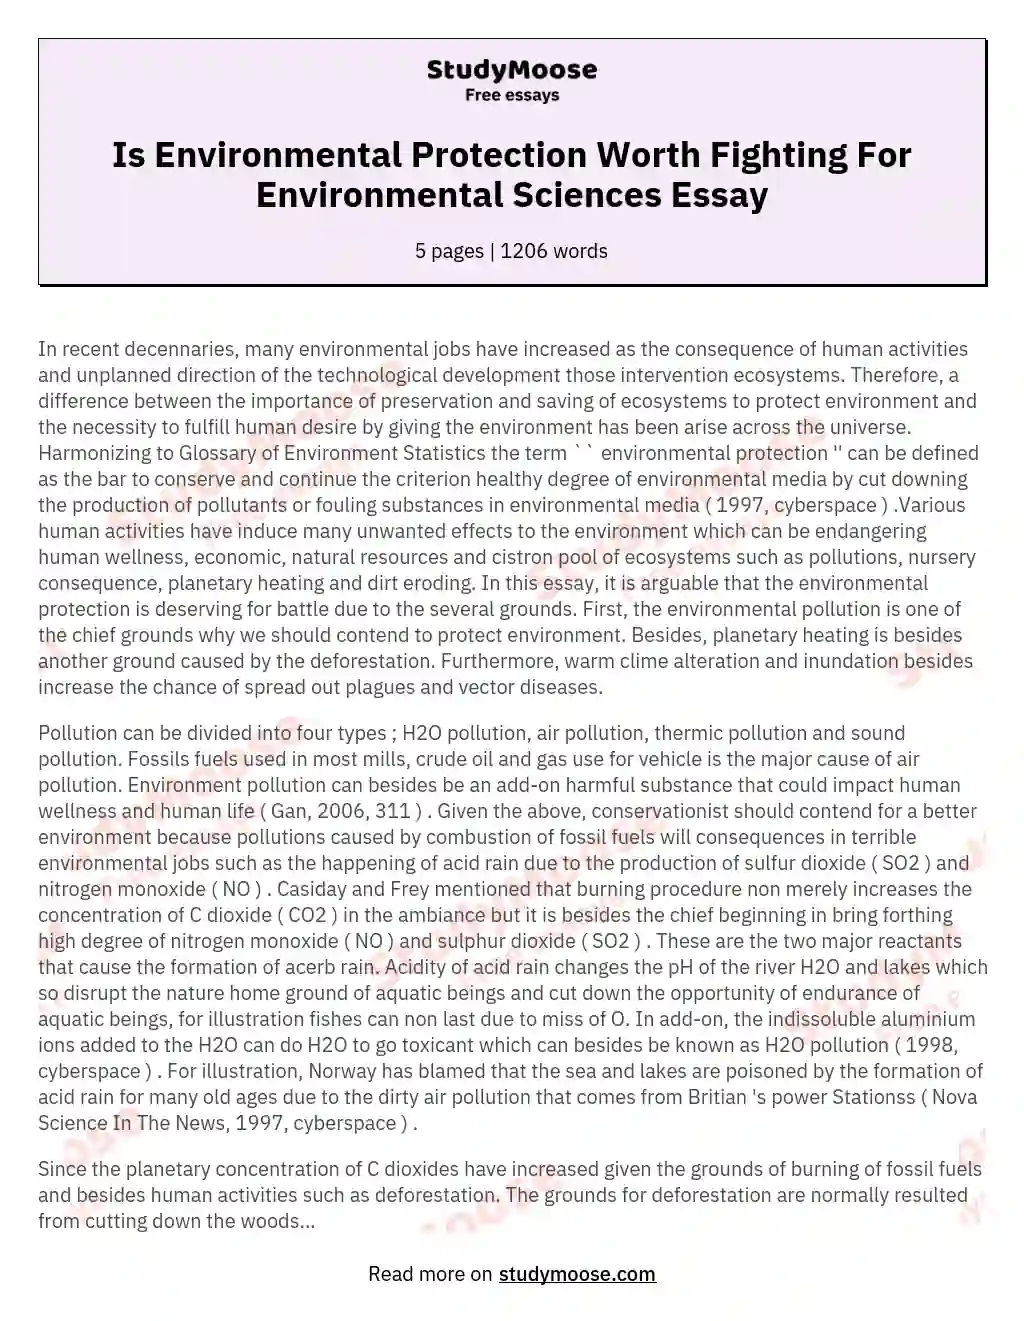 Is Environmental Protection Worth Fighting For Environmental Sciences Essay essay